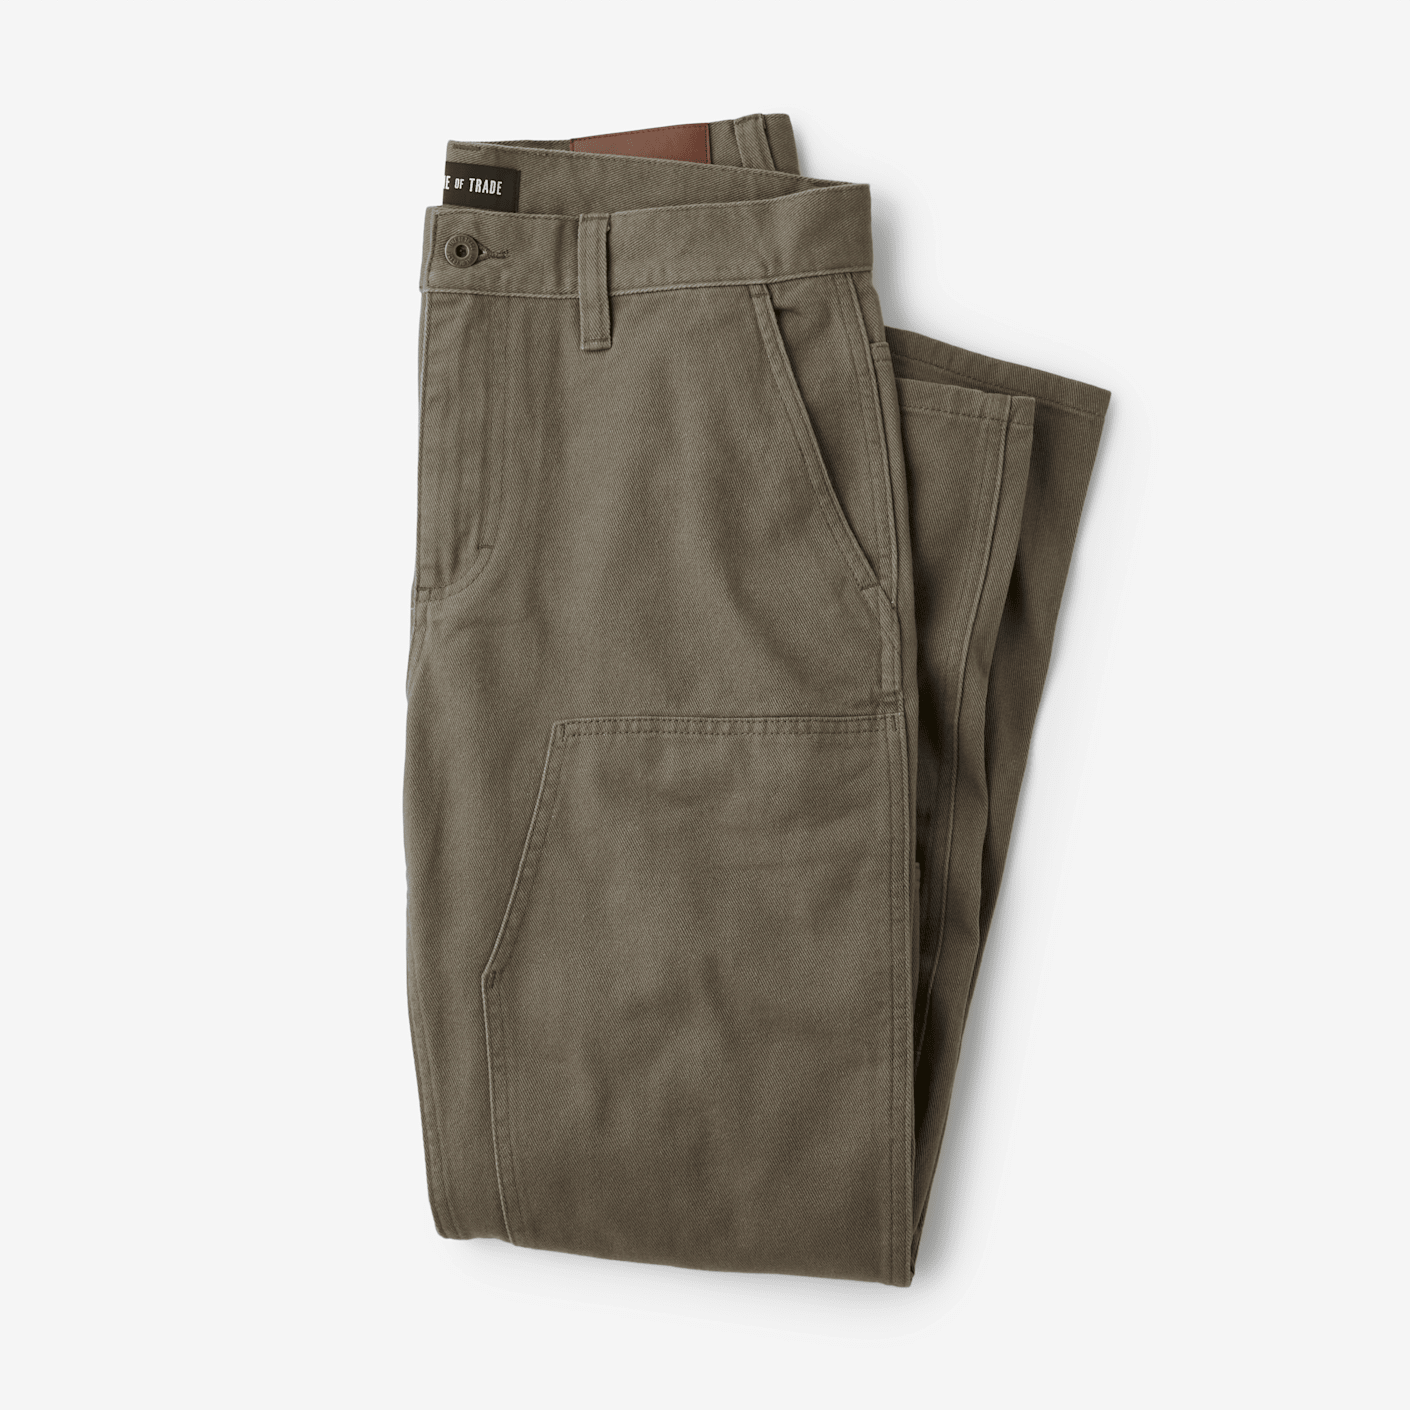 The Utility Pant Line of Trade | Bespoke Post